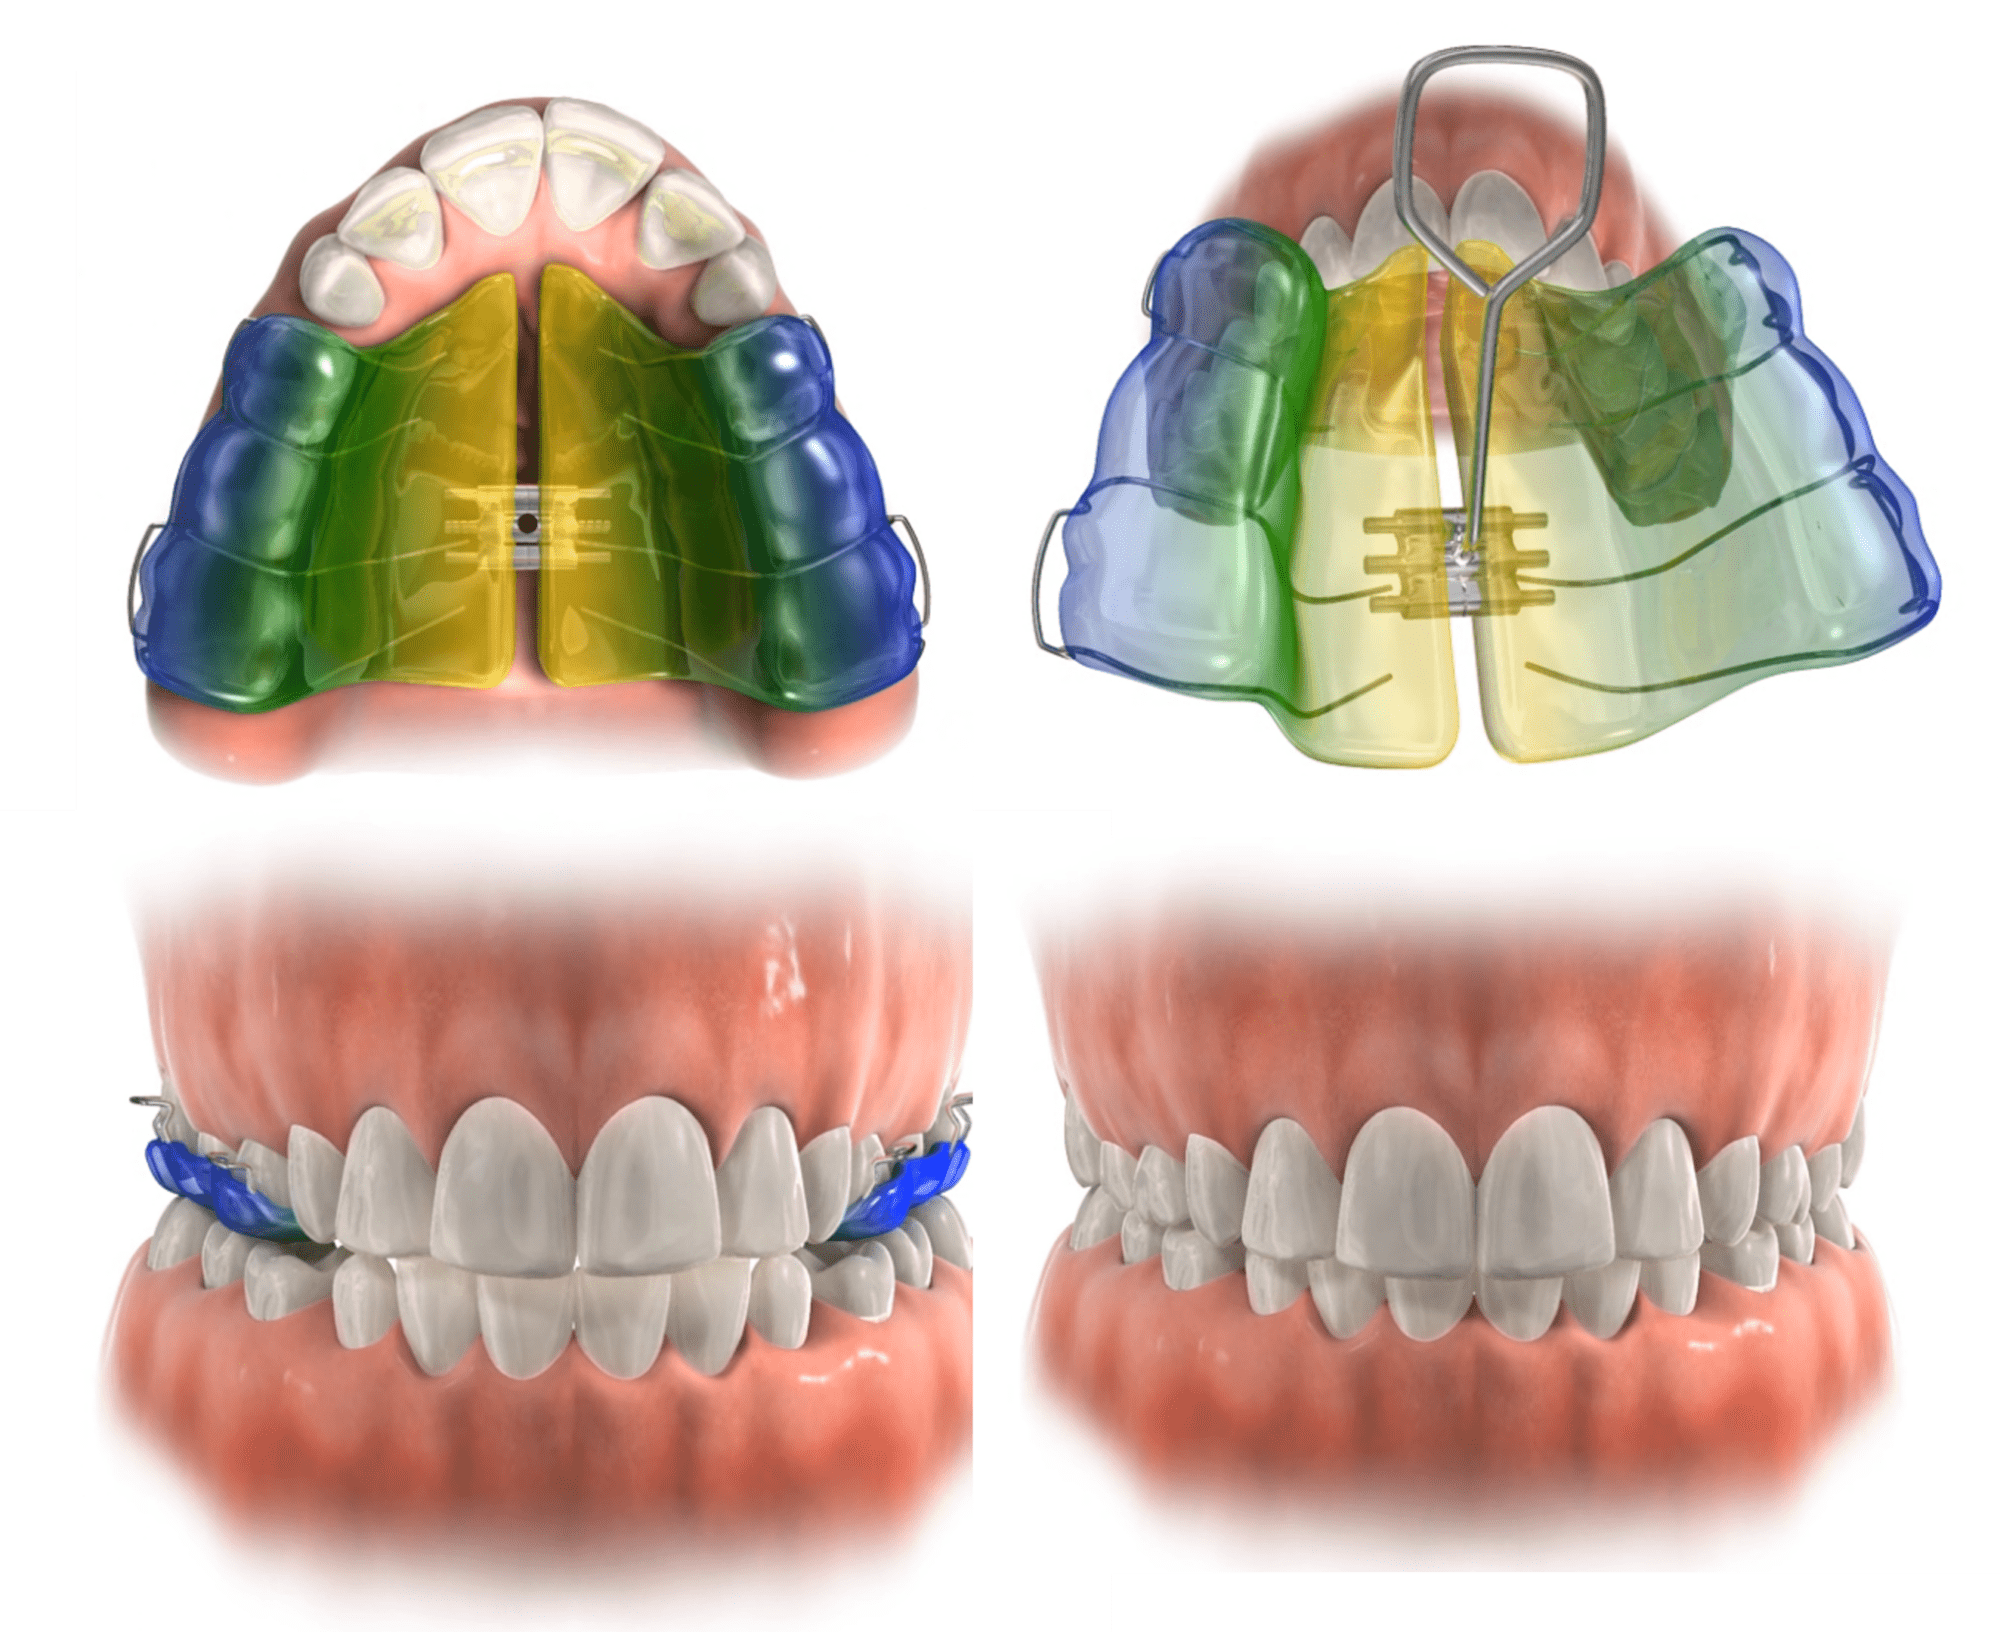 A removable expander can be used to widen the upper arch as illustrated here.